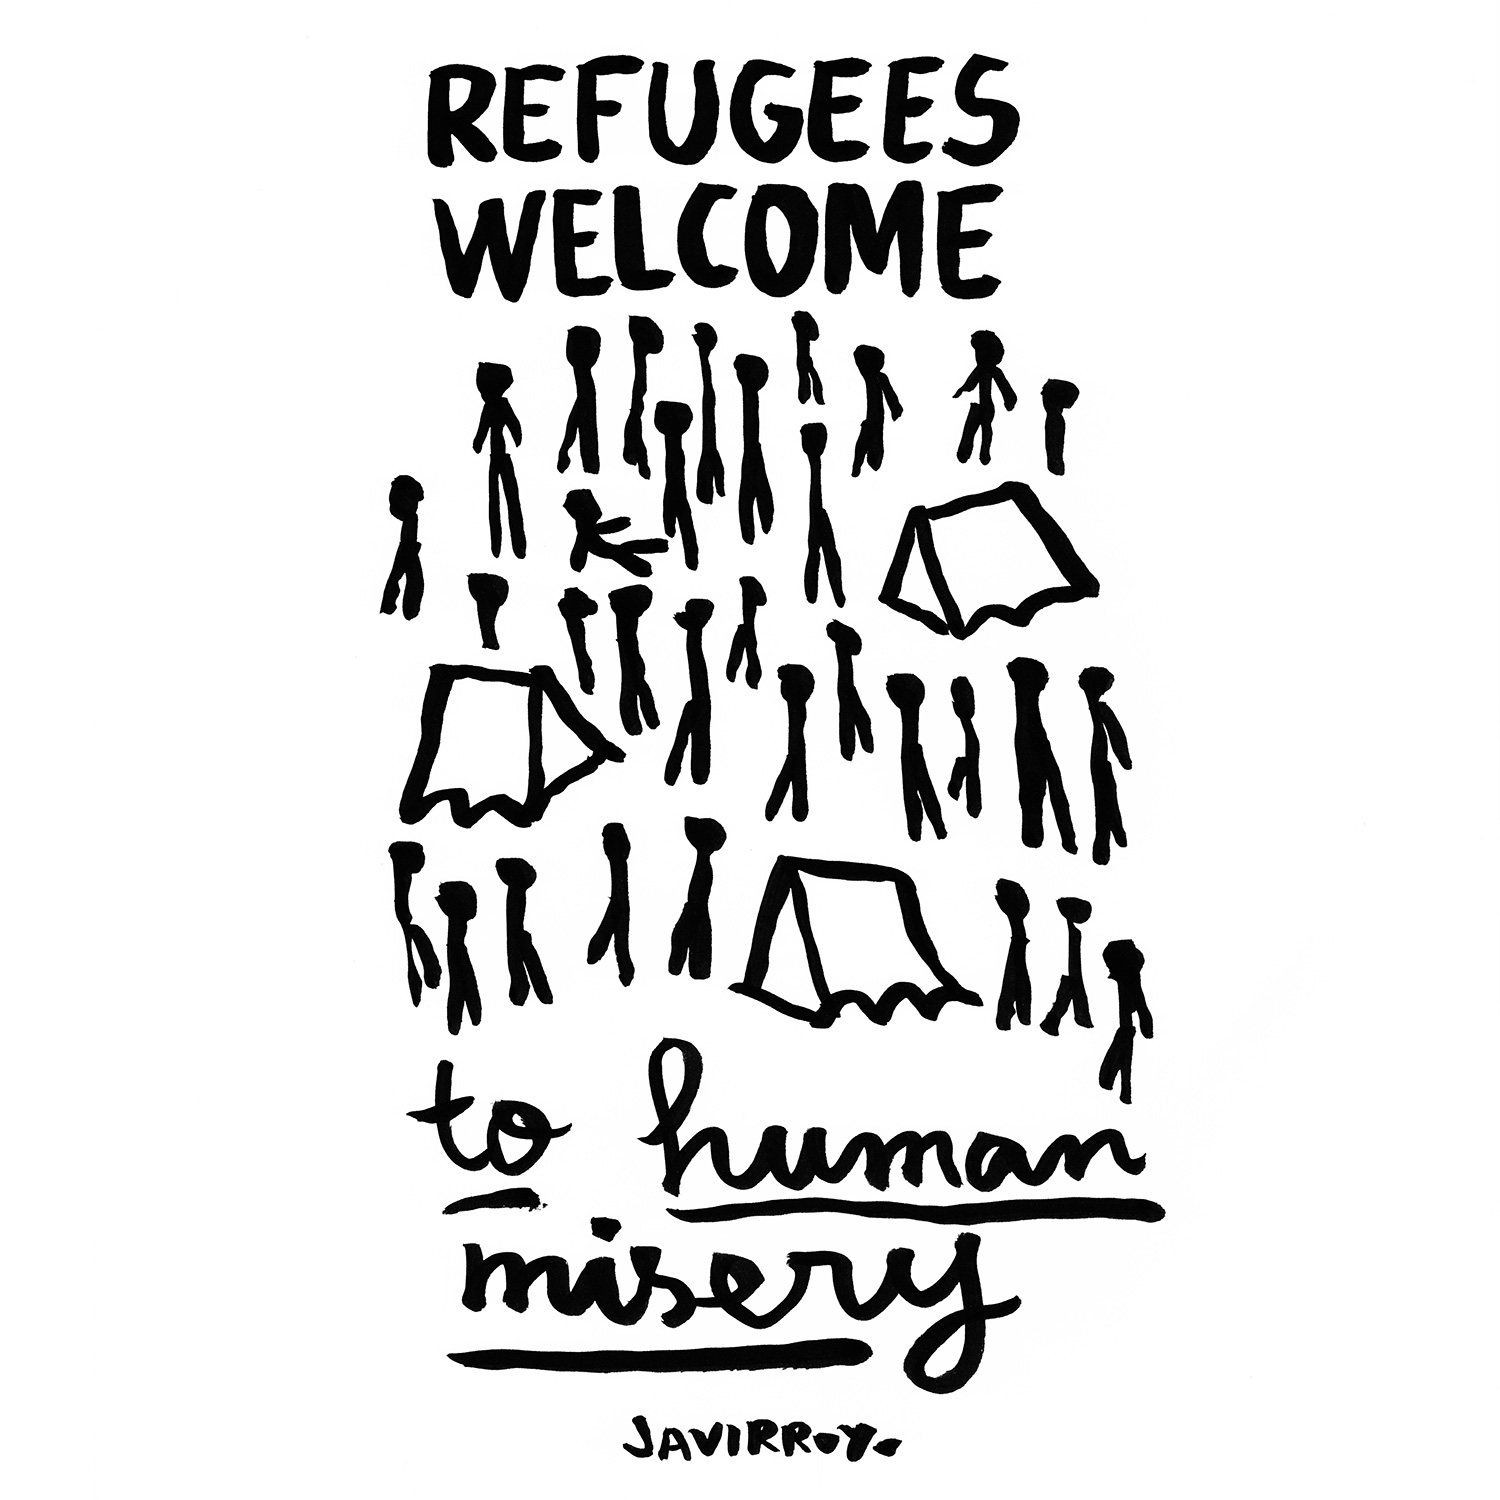 refugees-welcome-to-human-misery